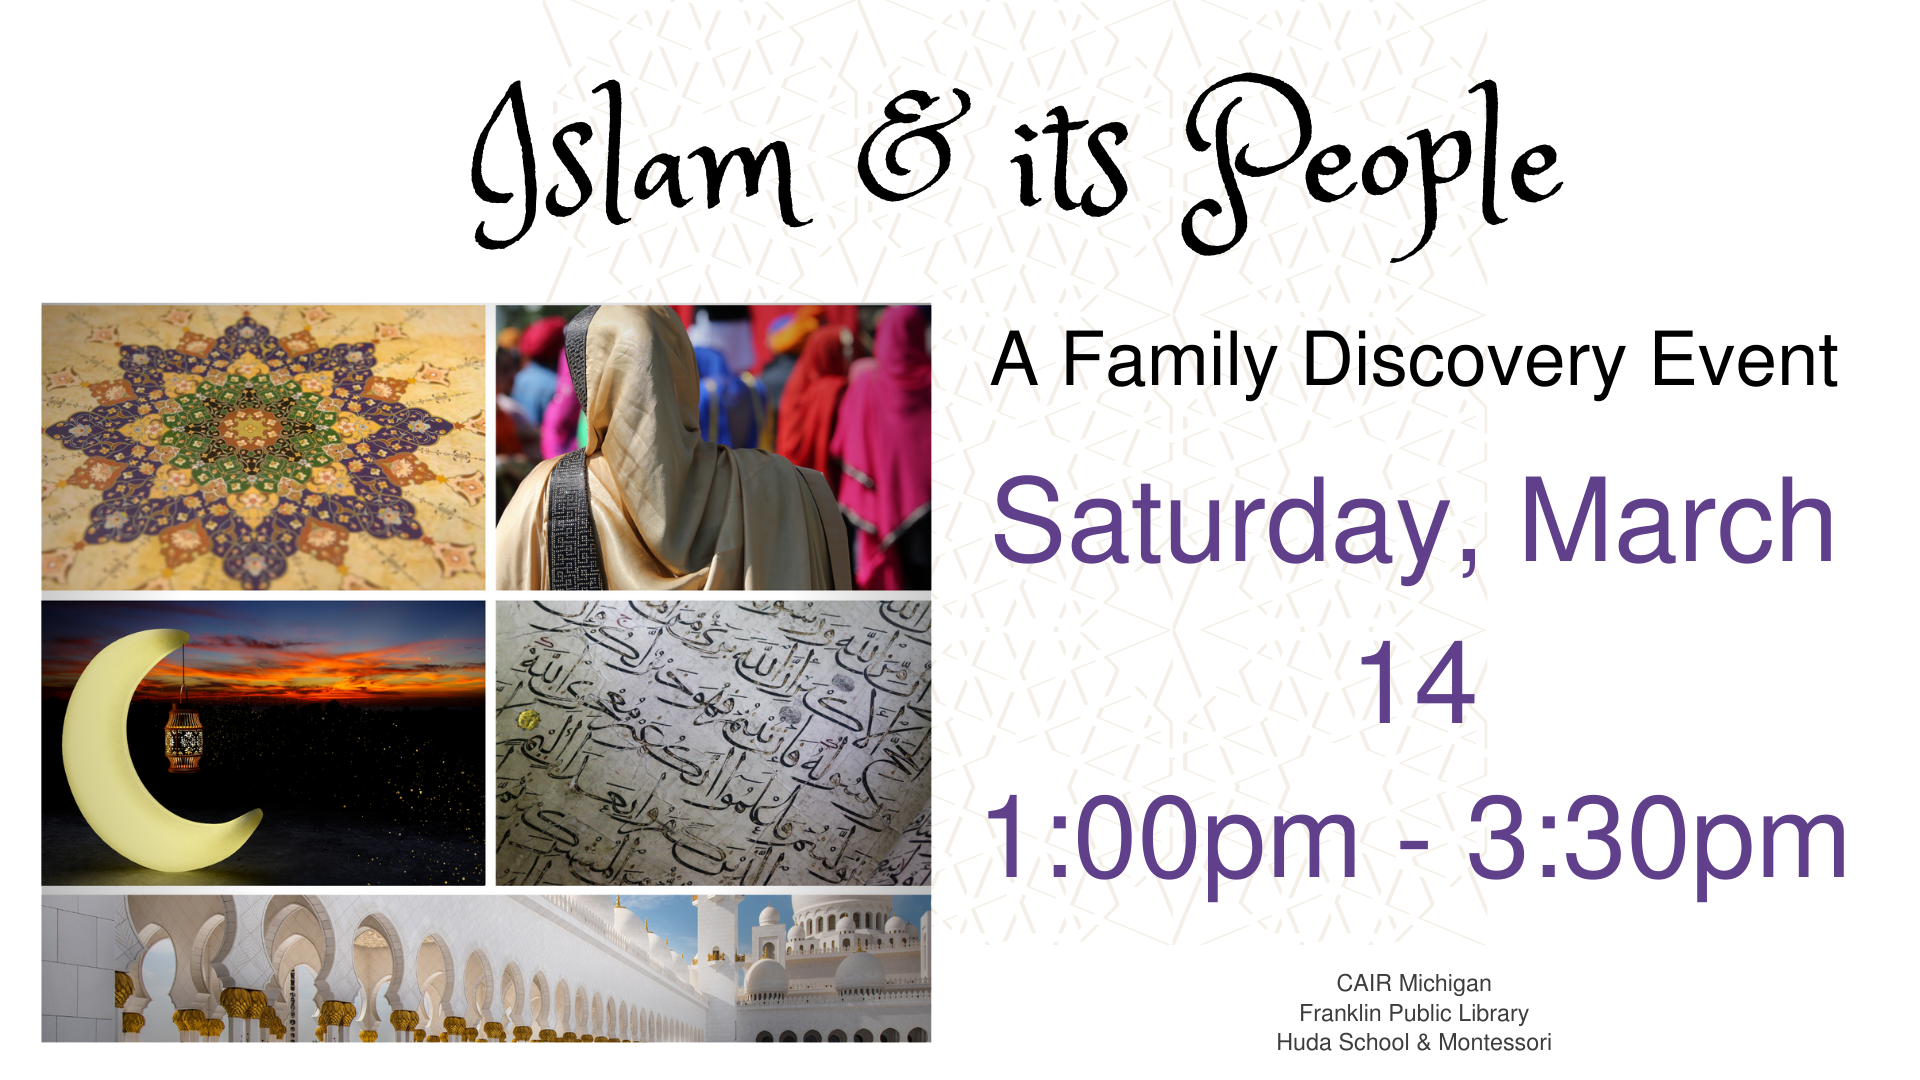 CAROUSEL Islam and its People - Main Flyer 3.14.20.png